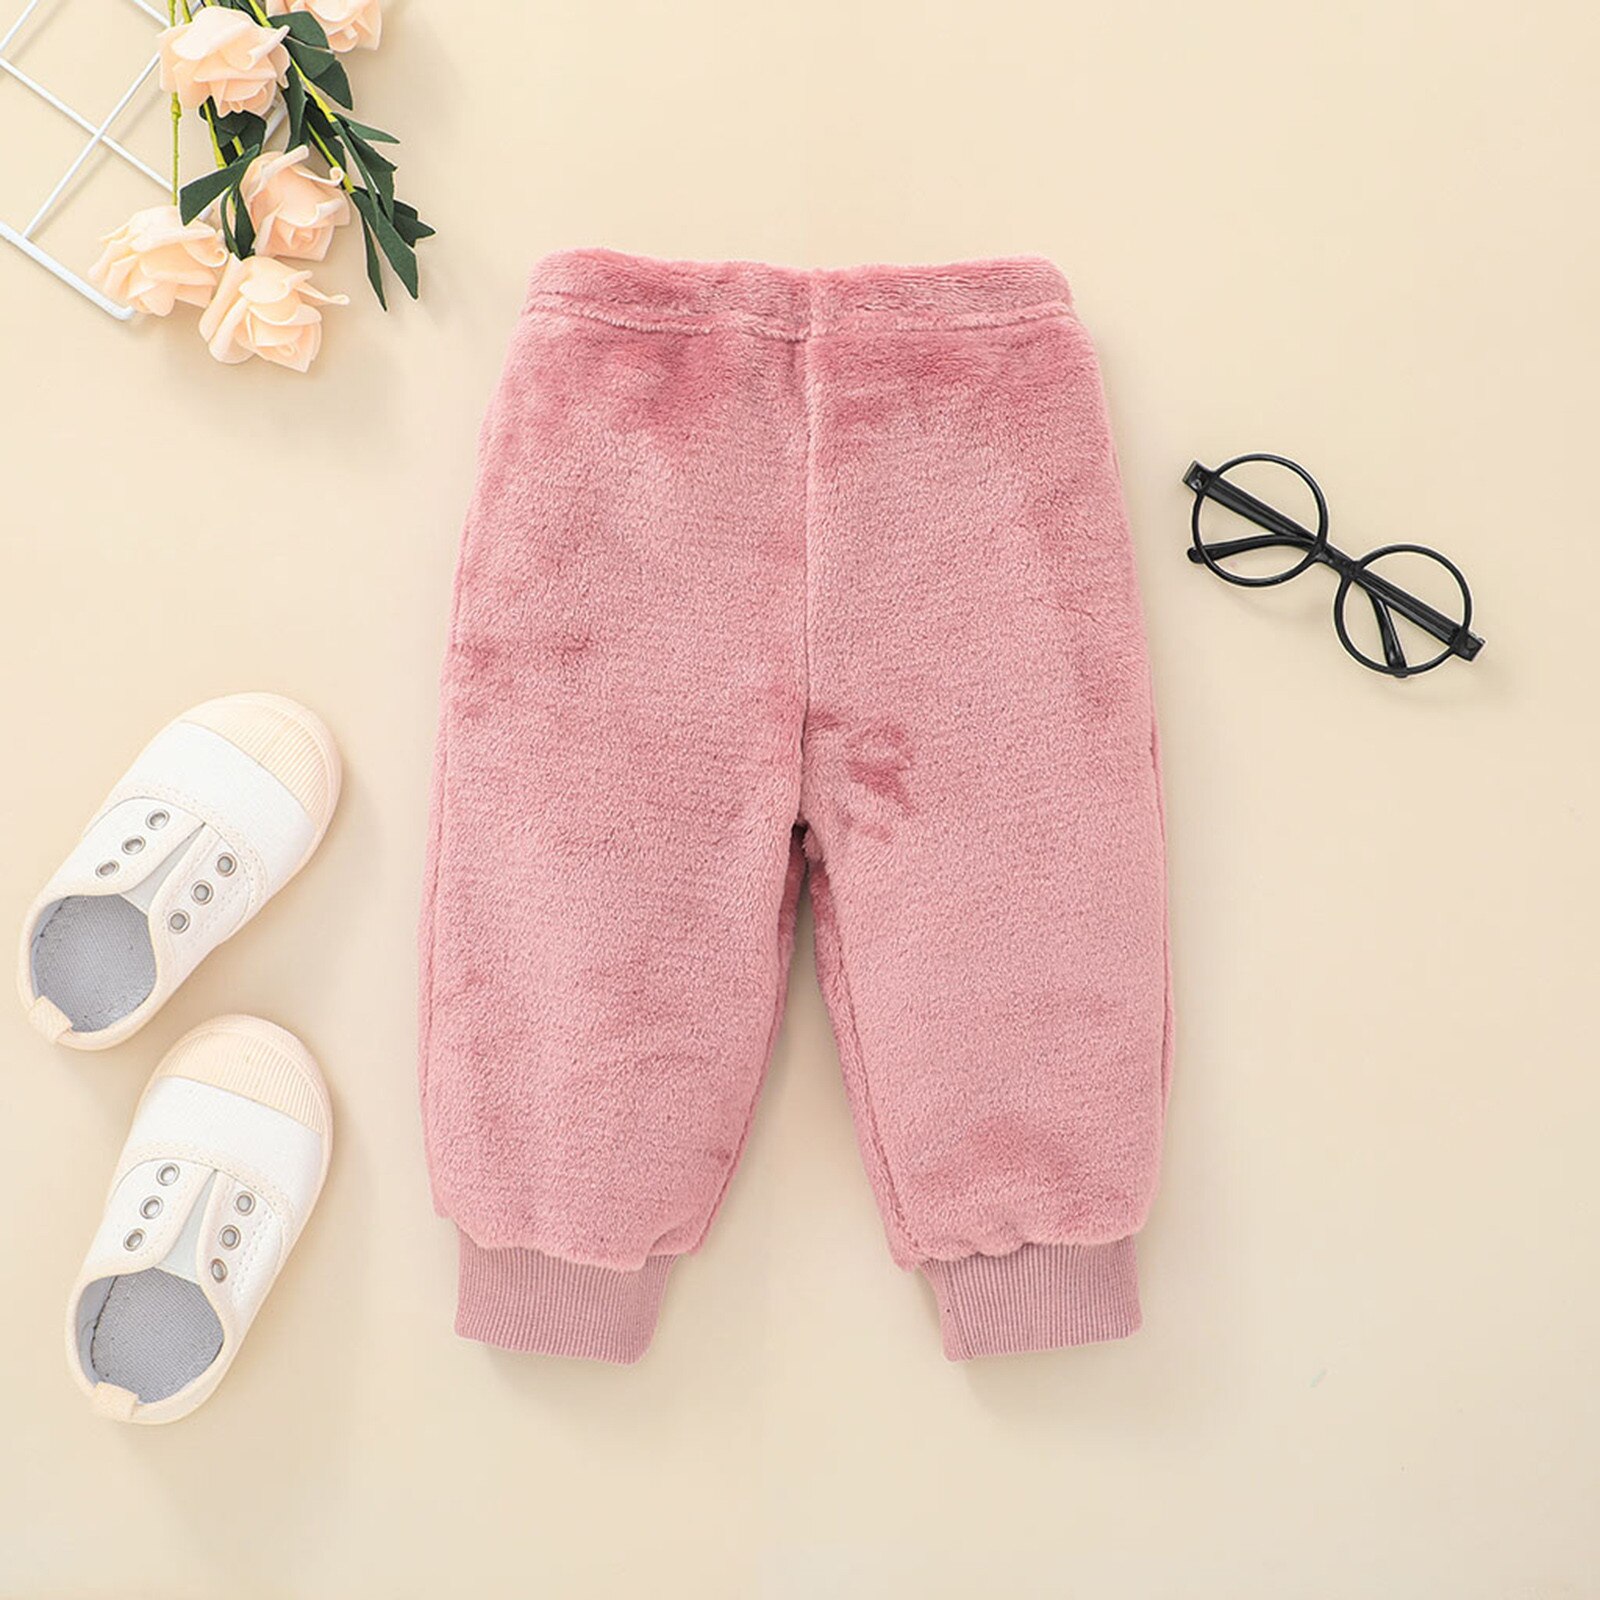 Winter-Newborn-Baby-Girls-Clothes-Patchwork-Fleece-Sweatshirt-Pants-Baby-Outfit-Tracksuit-Girl-Clothing-Set-6-3